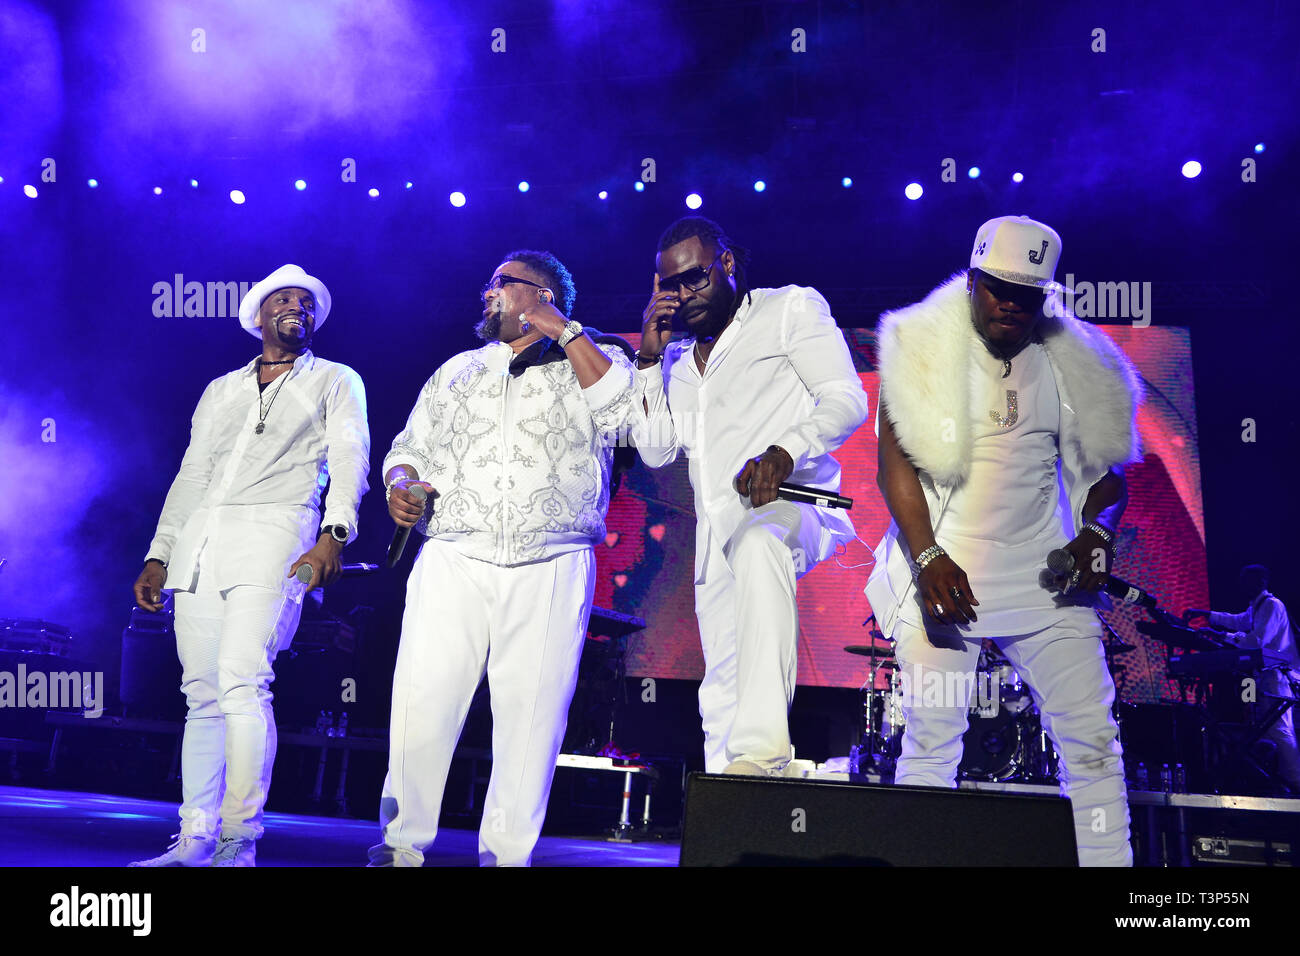 performs during the 14th Annual Jazz in the Gardens Music Festival at Hard Rock Stadium on March 09, 2019 in Miami gardens, Florida.  Featuring: Teddy Riley, Blackstreet Where: Miami Gardens, Florida, United States When: 10 Mar 2019 Credit: Johnny Louis/WENN.com Stock Photo